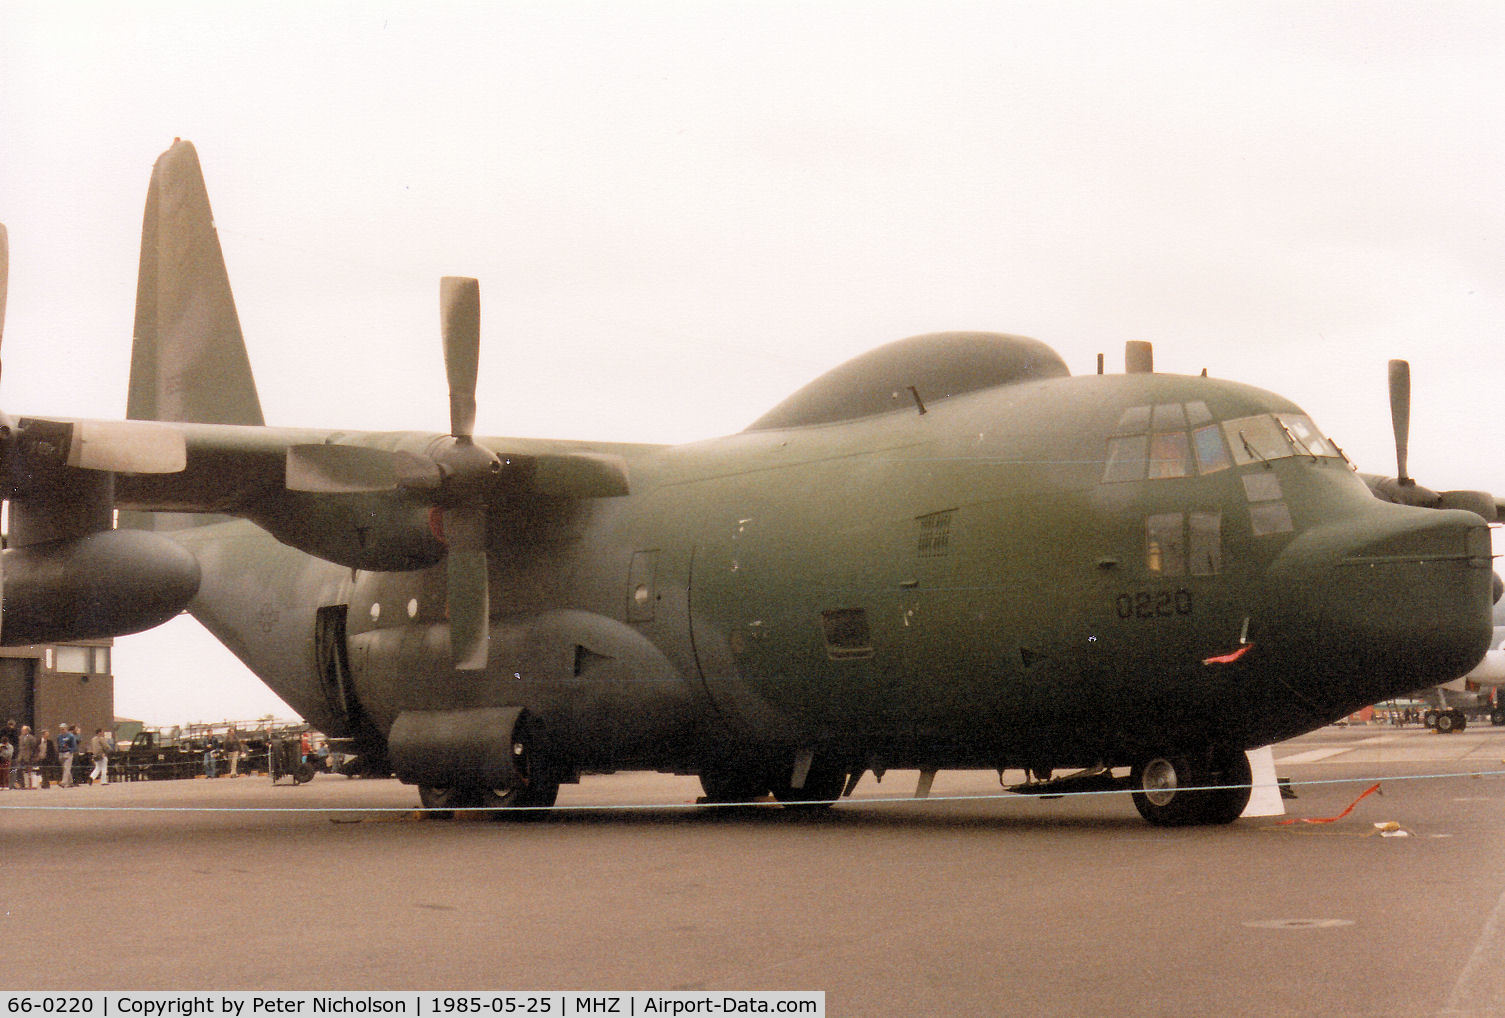 66-0220, 1966 Lockheed HC-130P Hercules C/N 382-4179, HC-130P Hercules of the 67th Aerospace Rescue & Recovery Squadron at RAF Woodbridge on display at the 1985 RAF Mildenhall Air Fete.